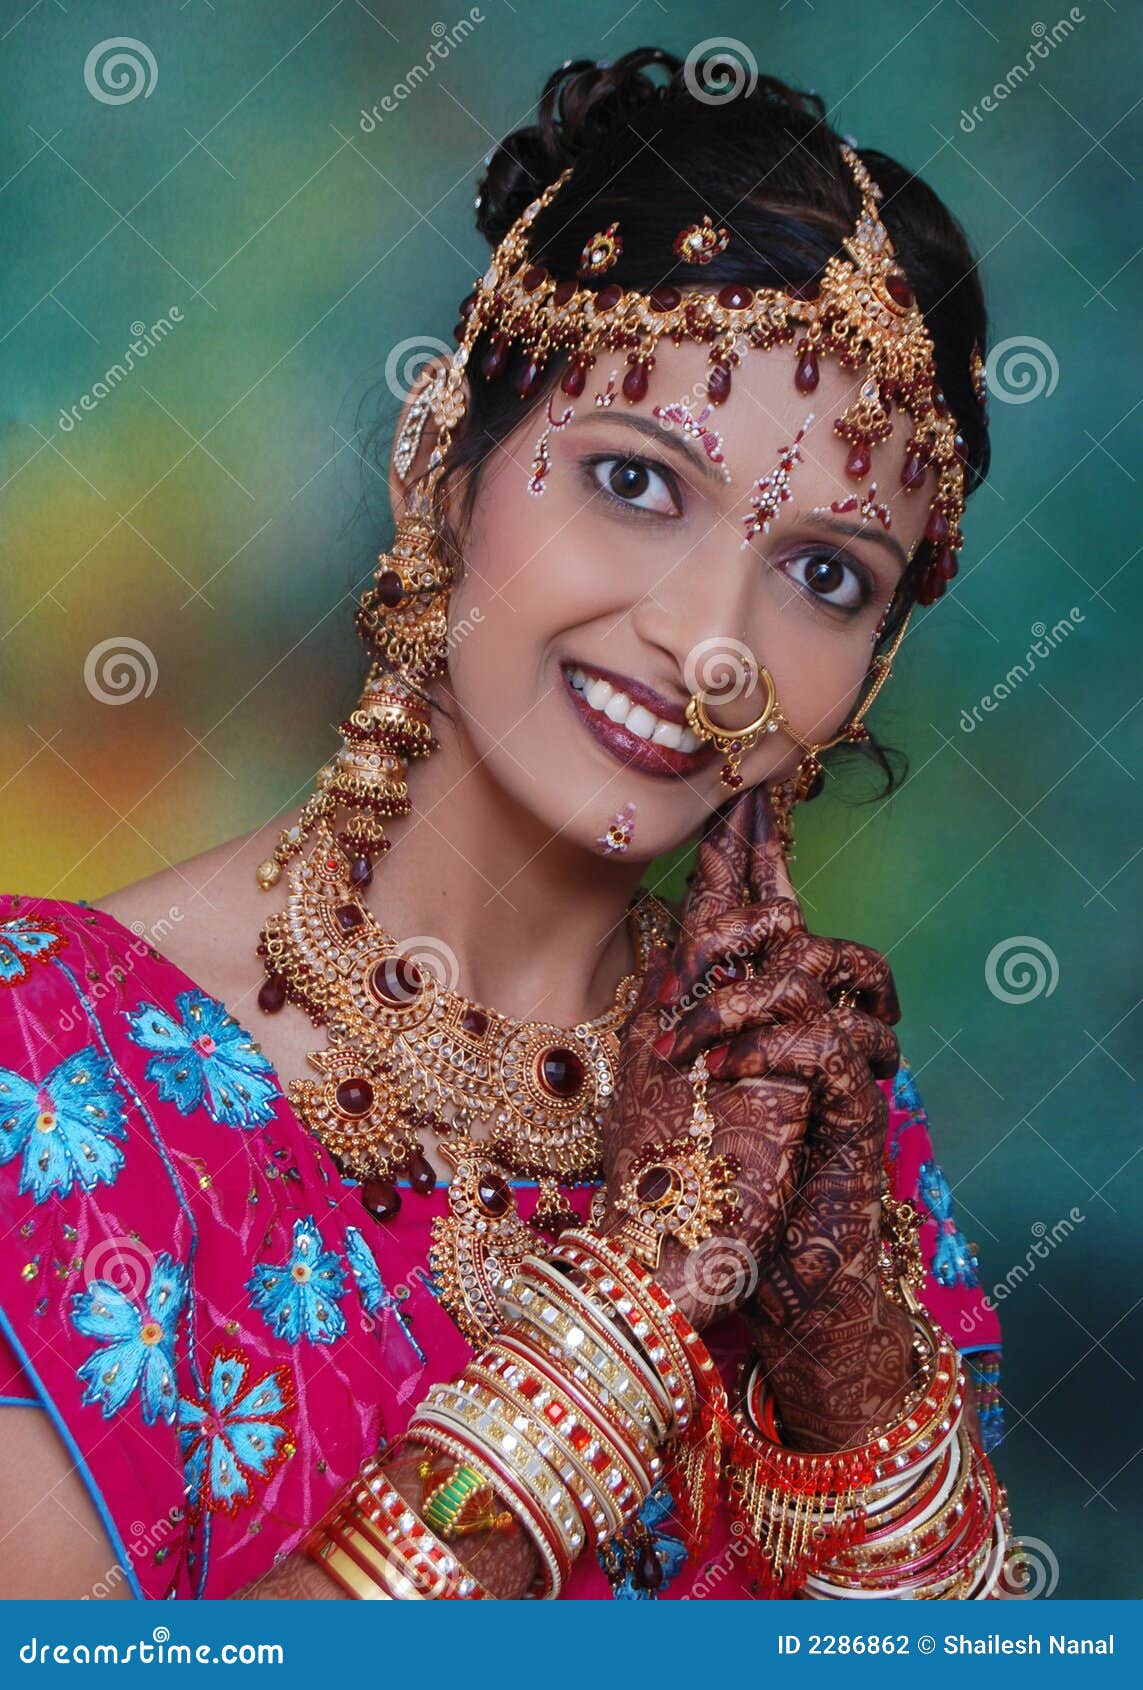 A Girl from India stock photo. Image of ornaments, background - 2895546